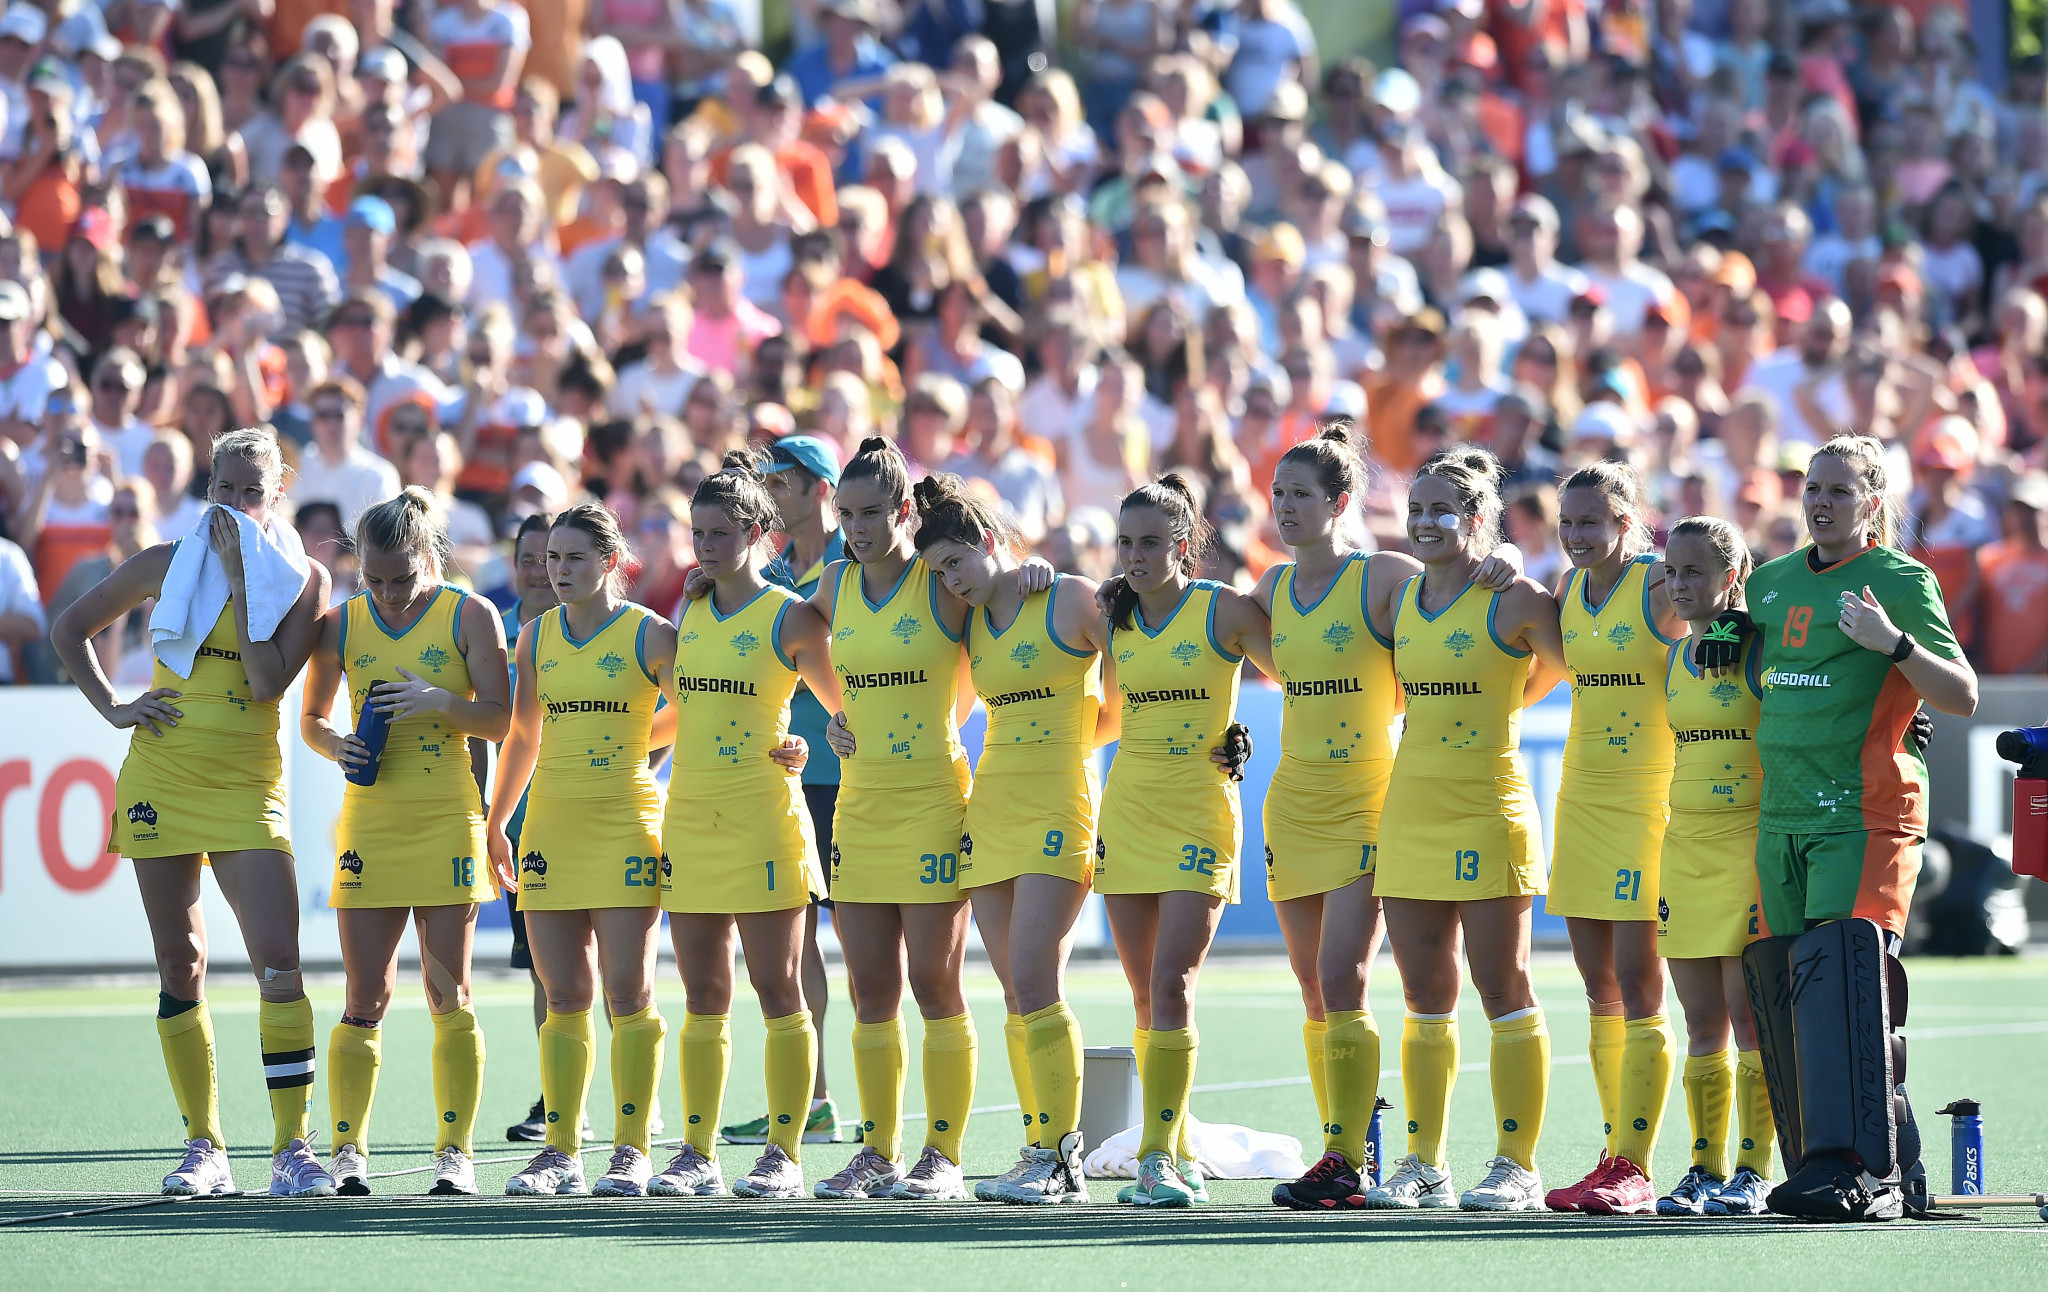 Members of the Australian women's hockey team are allegedly considering strike action due to the 